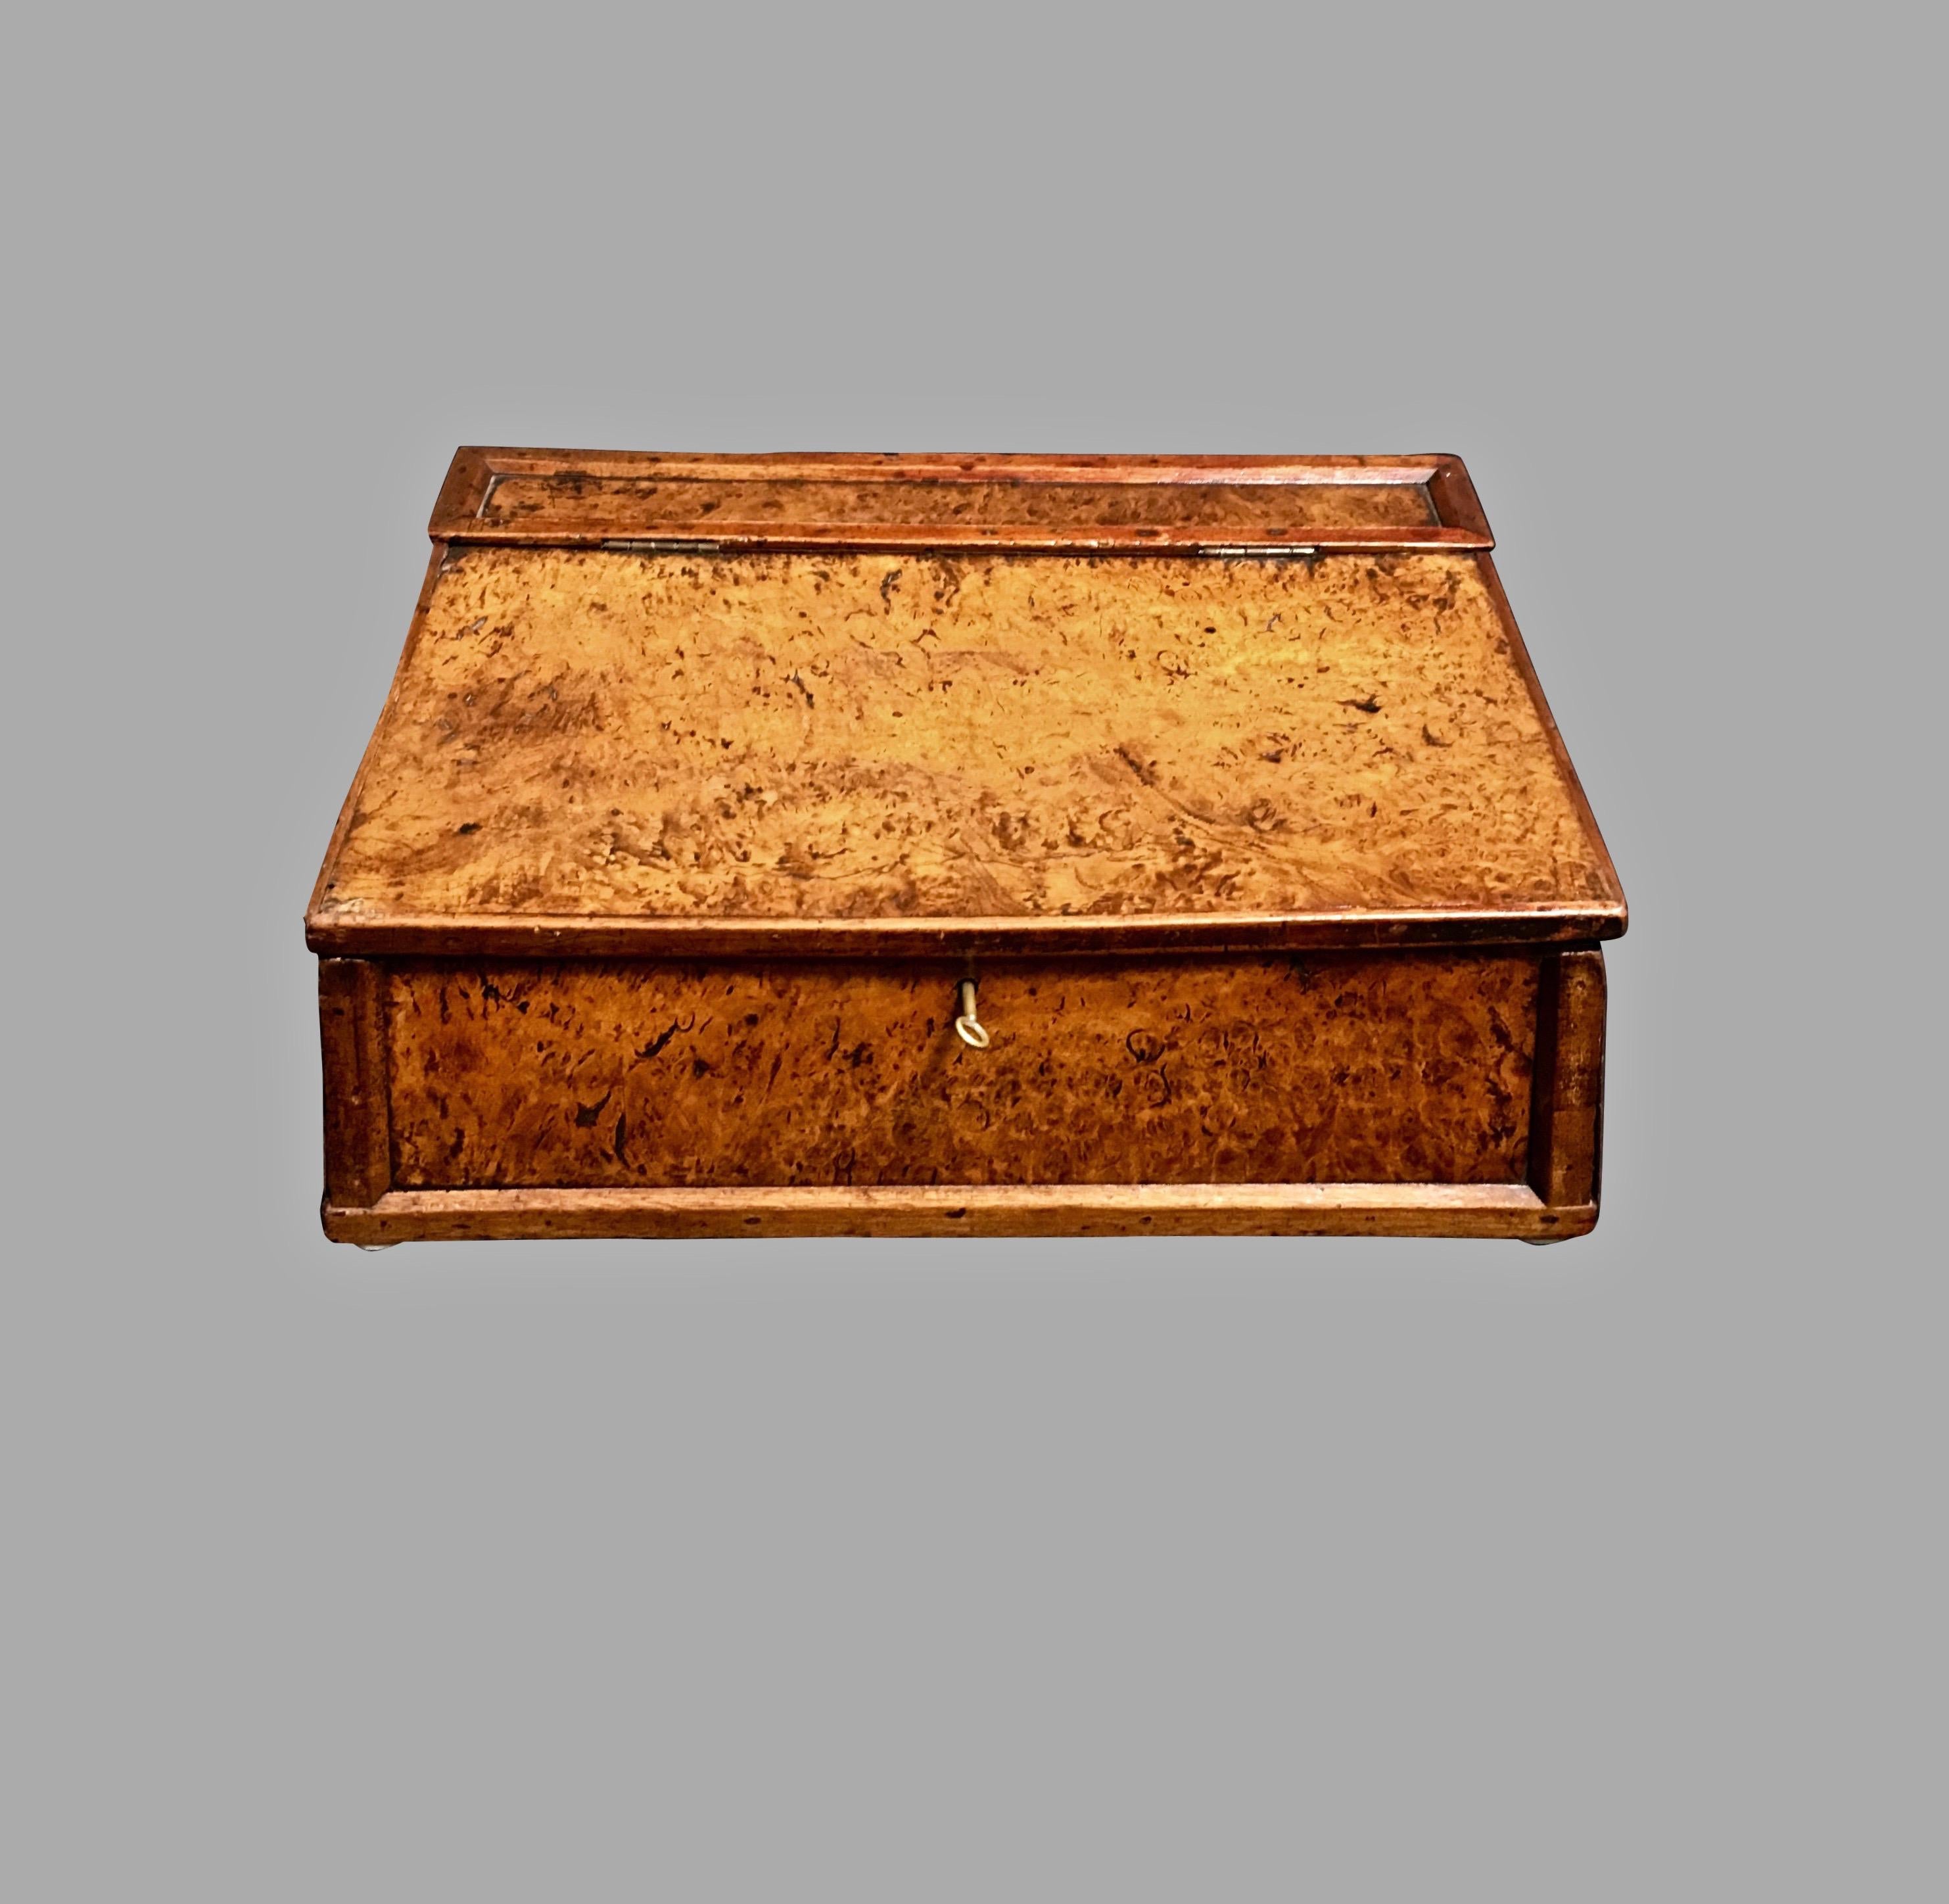 An English provincial burl elm writing slope, with a hinged lid opening to reveal a lined interior, circa 1800, with key.